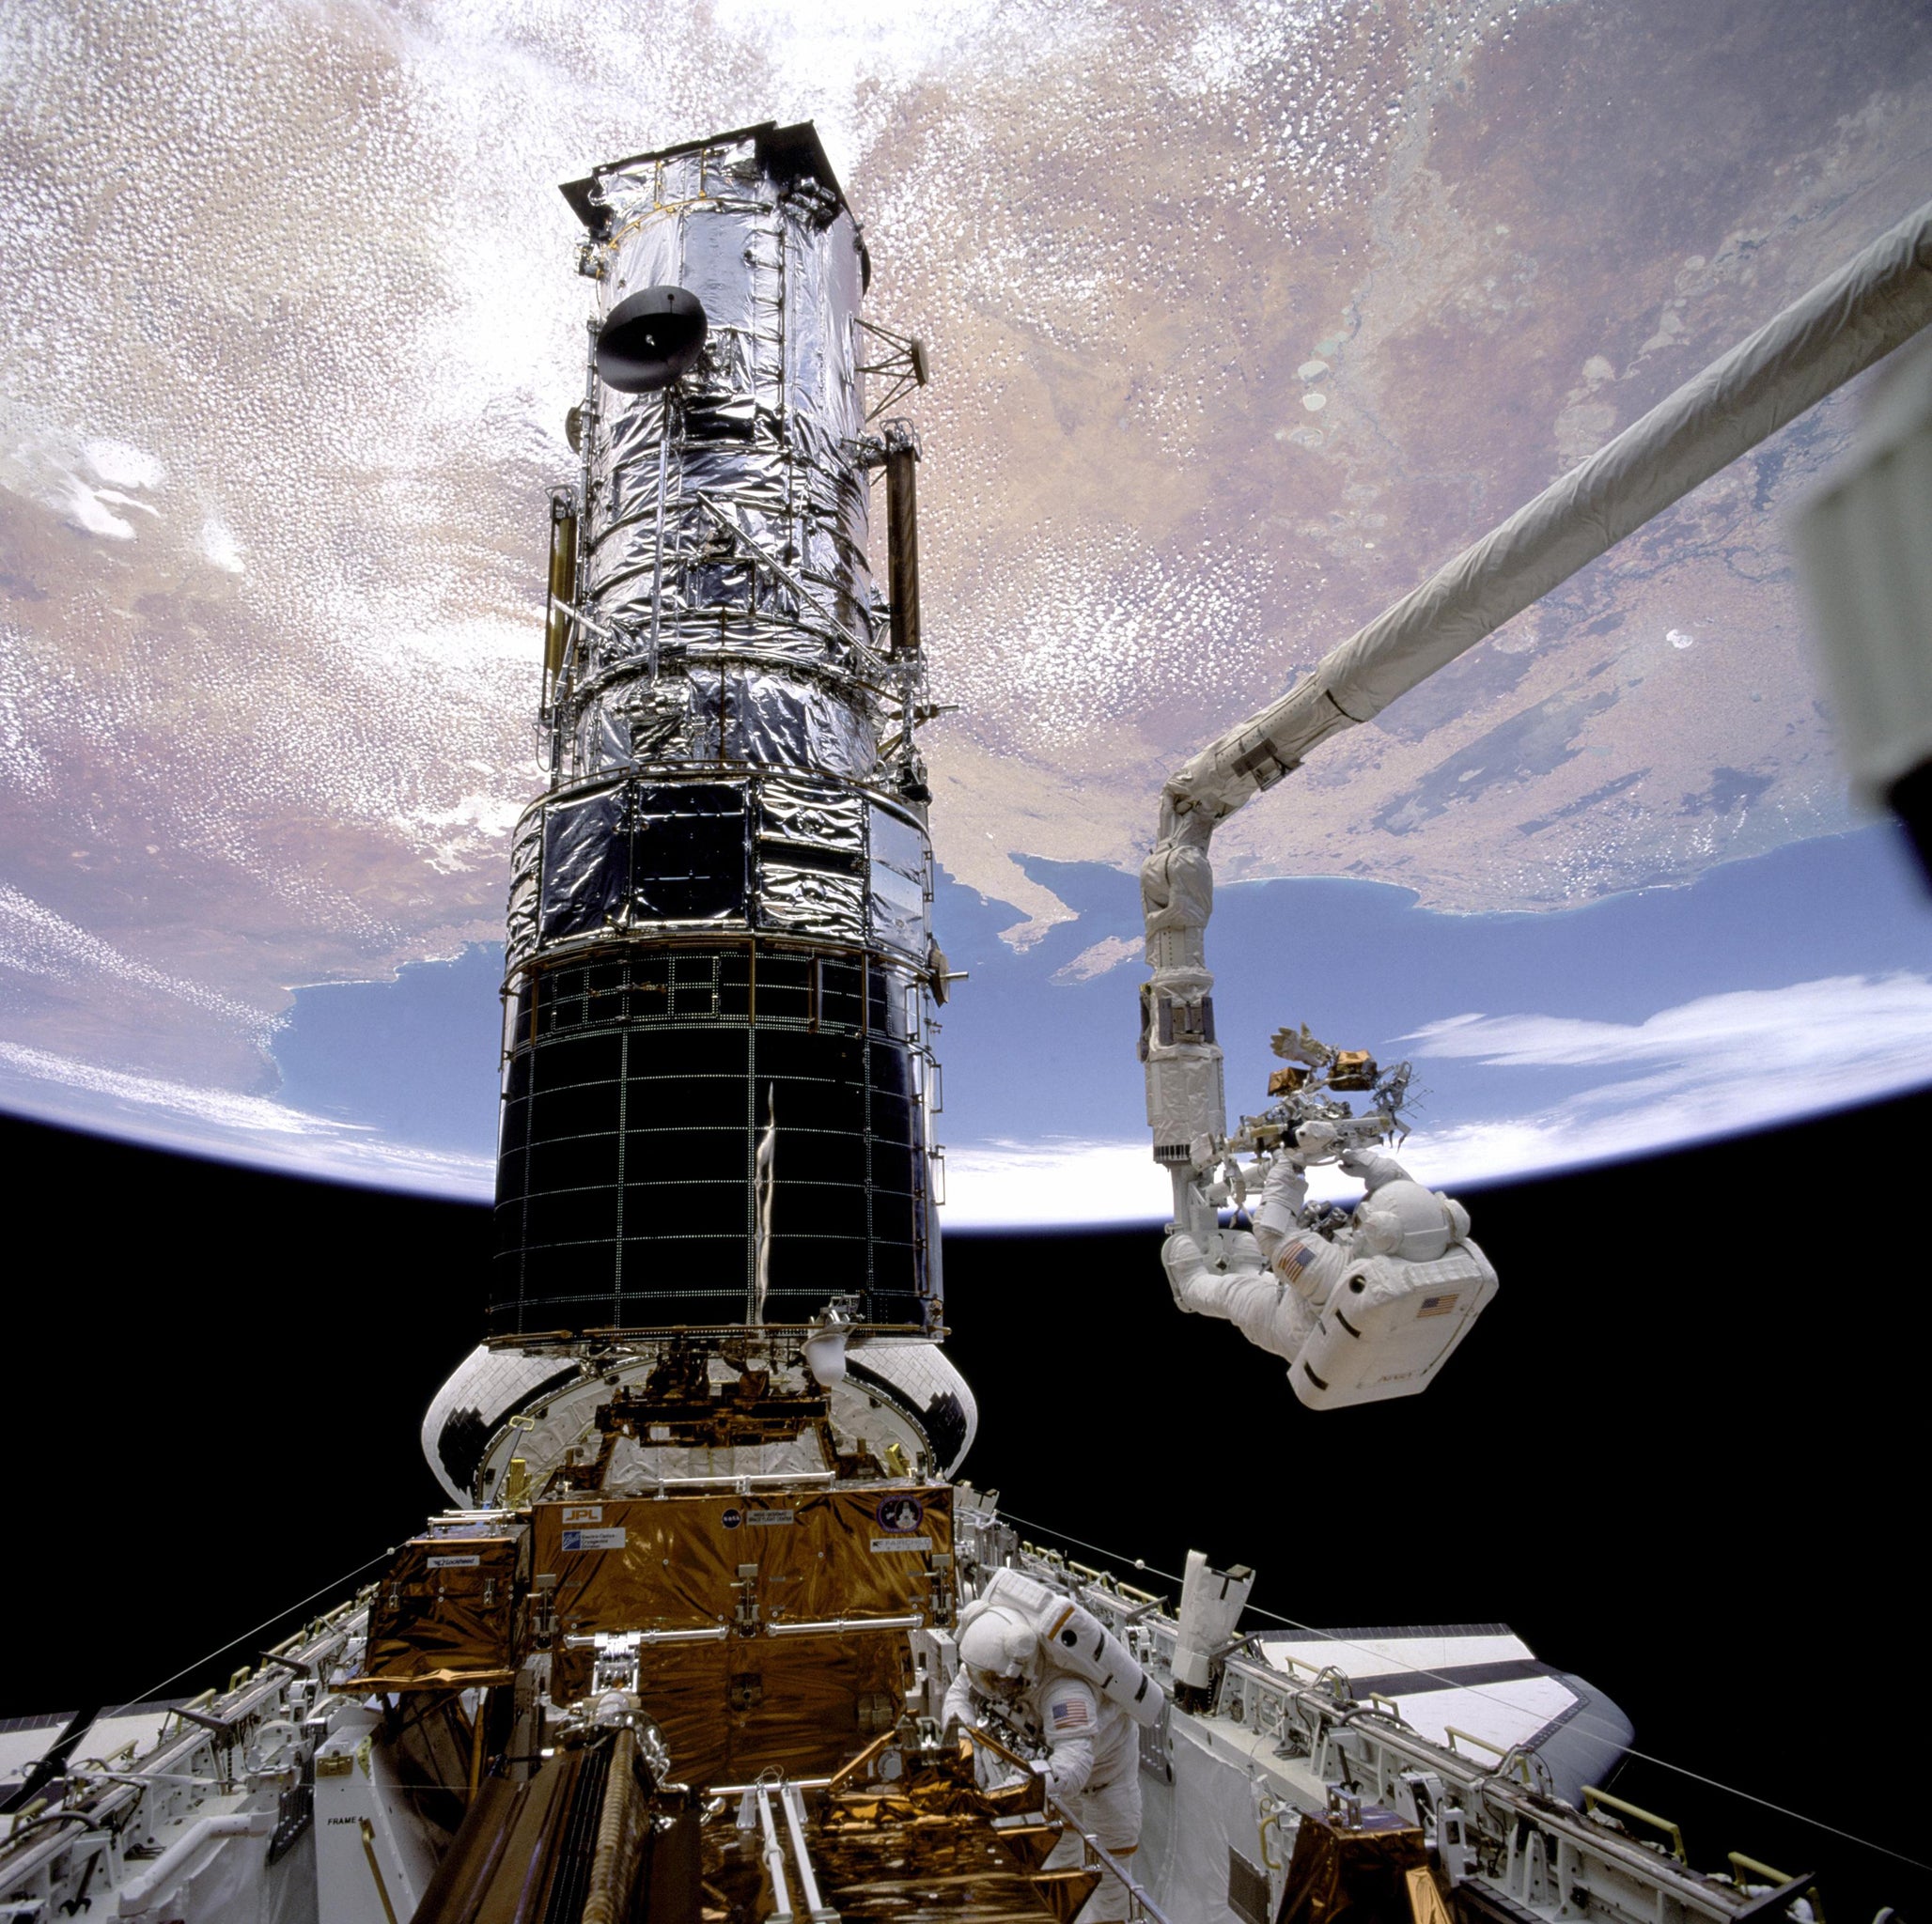 Astronauts repairing the Hubble Space Telescope Endeavour space shuttle, 1993 The Hubble Space Telescope was sent into space in 1990. Orbiting outside the distorting effects of the Earth’s atmosphere, it has taken the most breath-taking